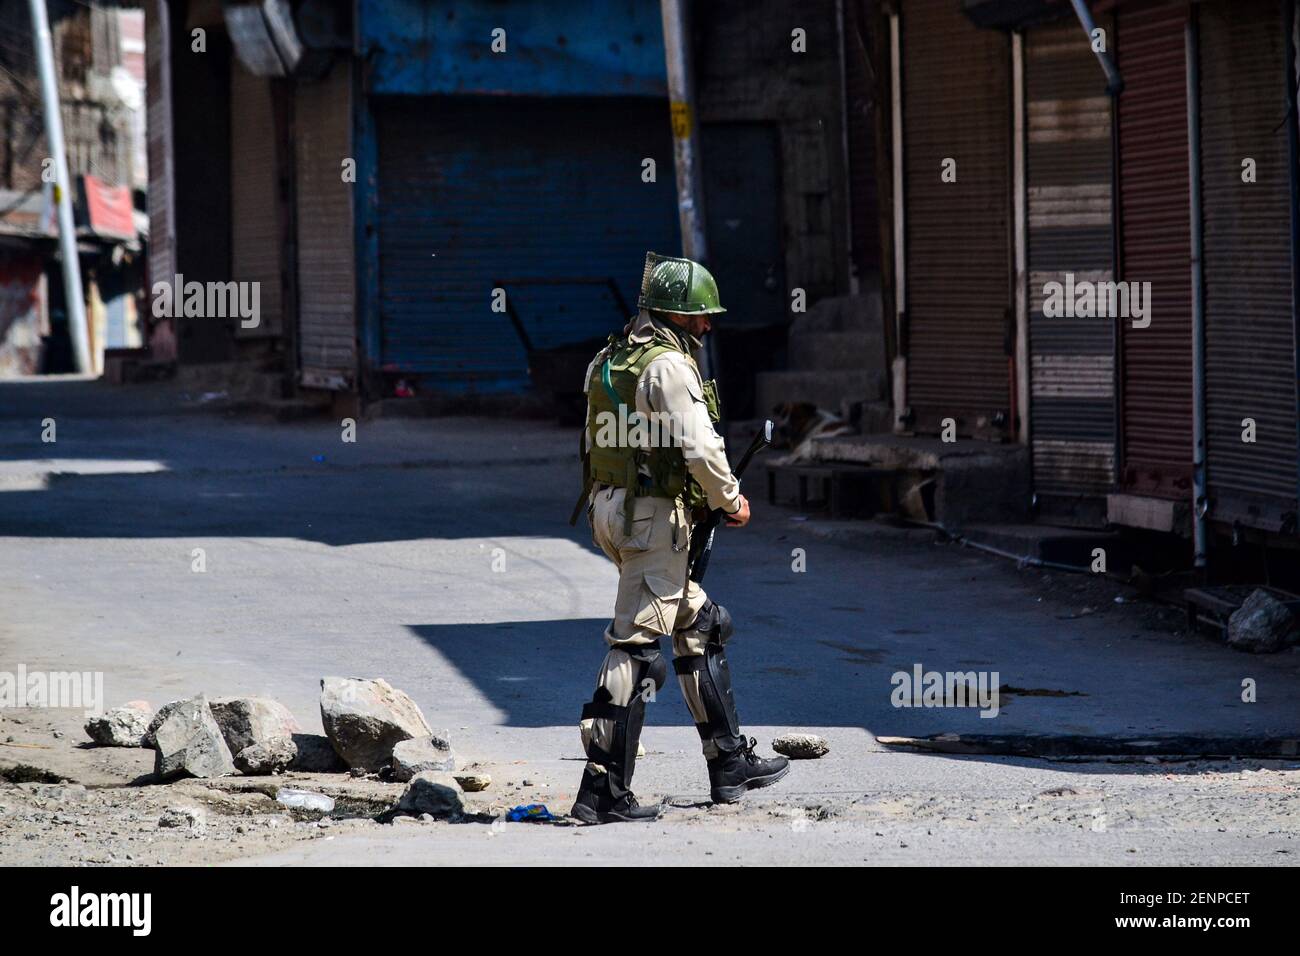 A paramilitary trooper patrols during restrictions in Srinagar, Kashmir. Kashmir valley remained shut for the 40th consecutive day following the scrapping of Article 370 by the central government which grants special status to Jammu & Kashmir. (Photo by Saqib Majeed / SOPA Images/Sipa USA) Stock Photo